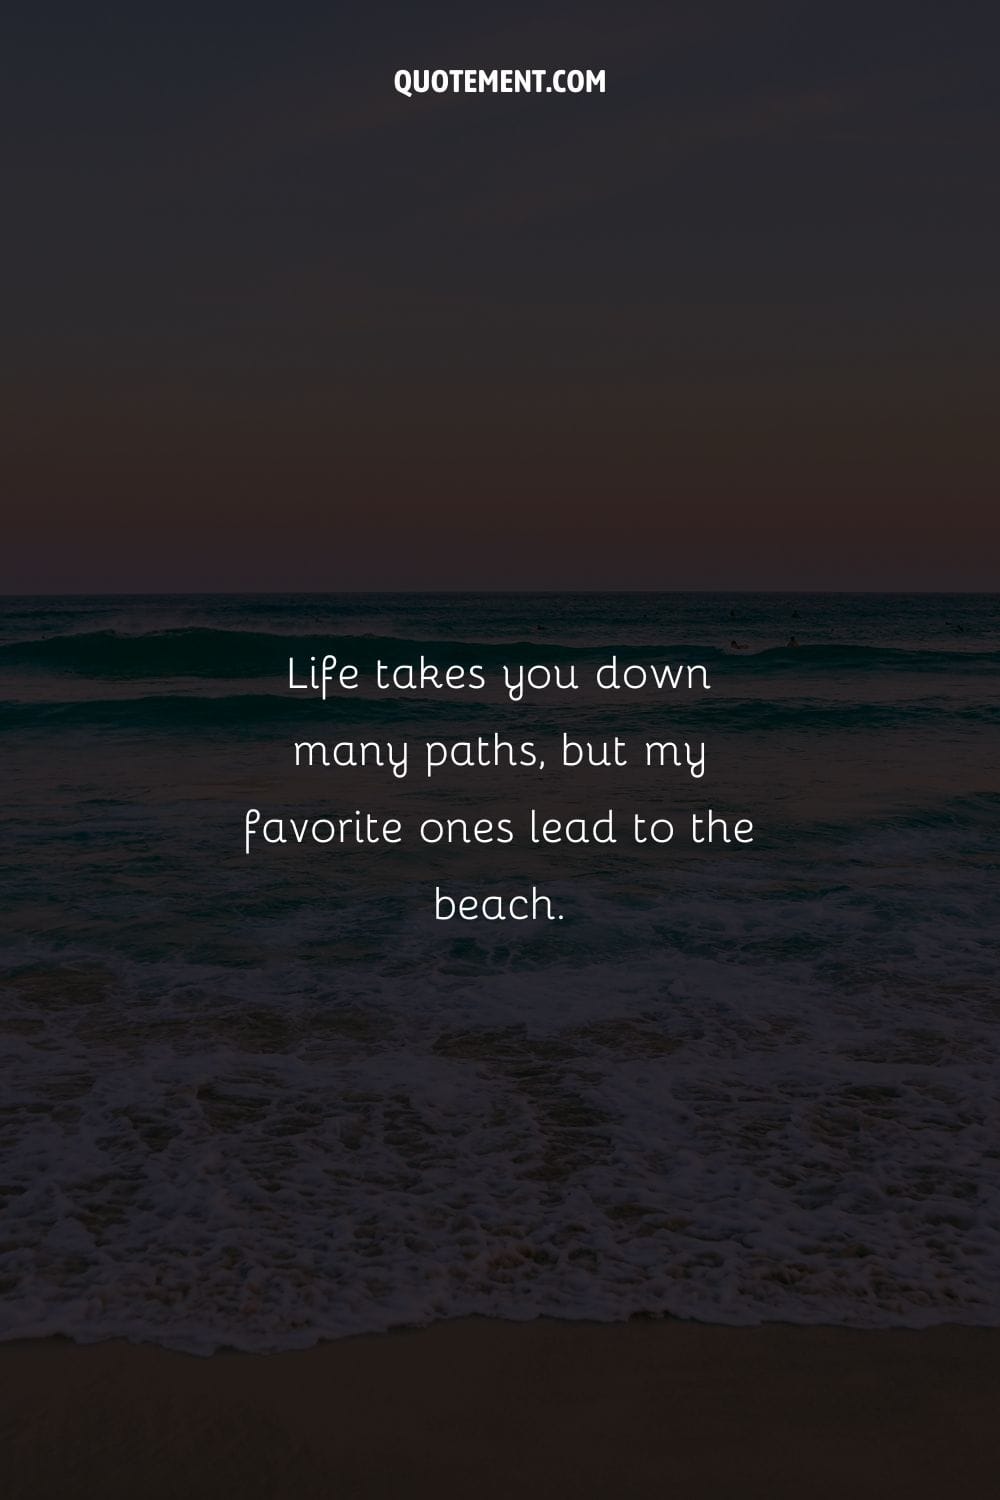 Life takes you down many paths, but my favorite ones lead to the beach.